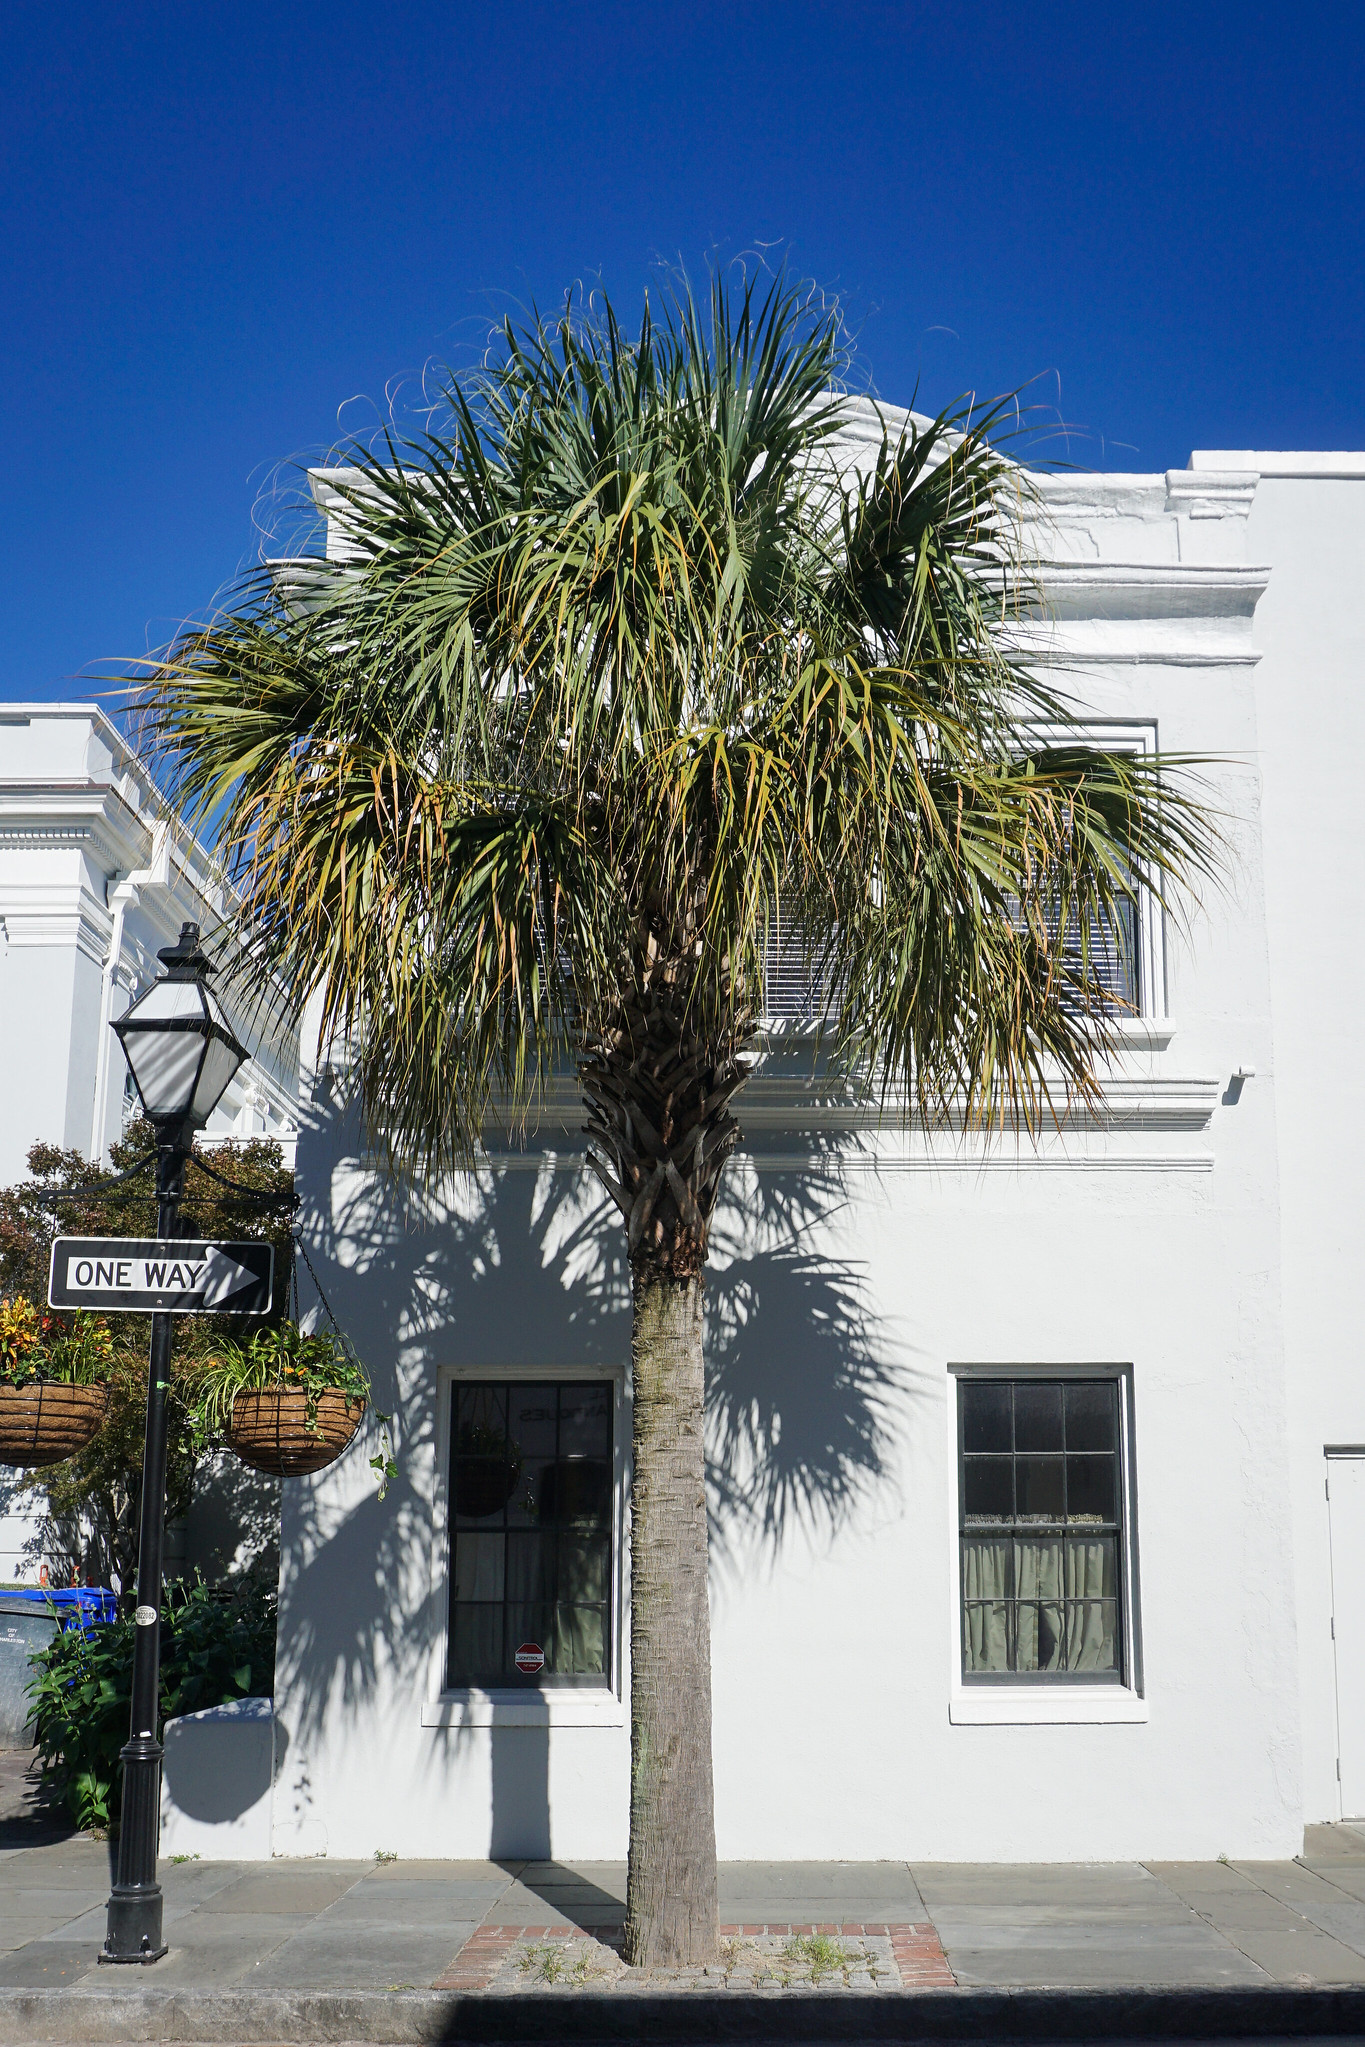 King Street Charleston | A First Timer's Guide to 3 Days in Charleston South Carolina | What to do in Charleston | Charleston Travel Guide | Best Things to do in Charleston